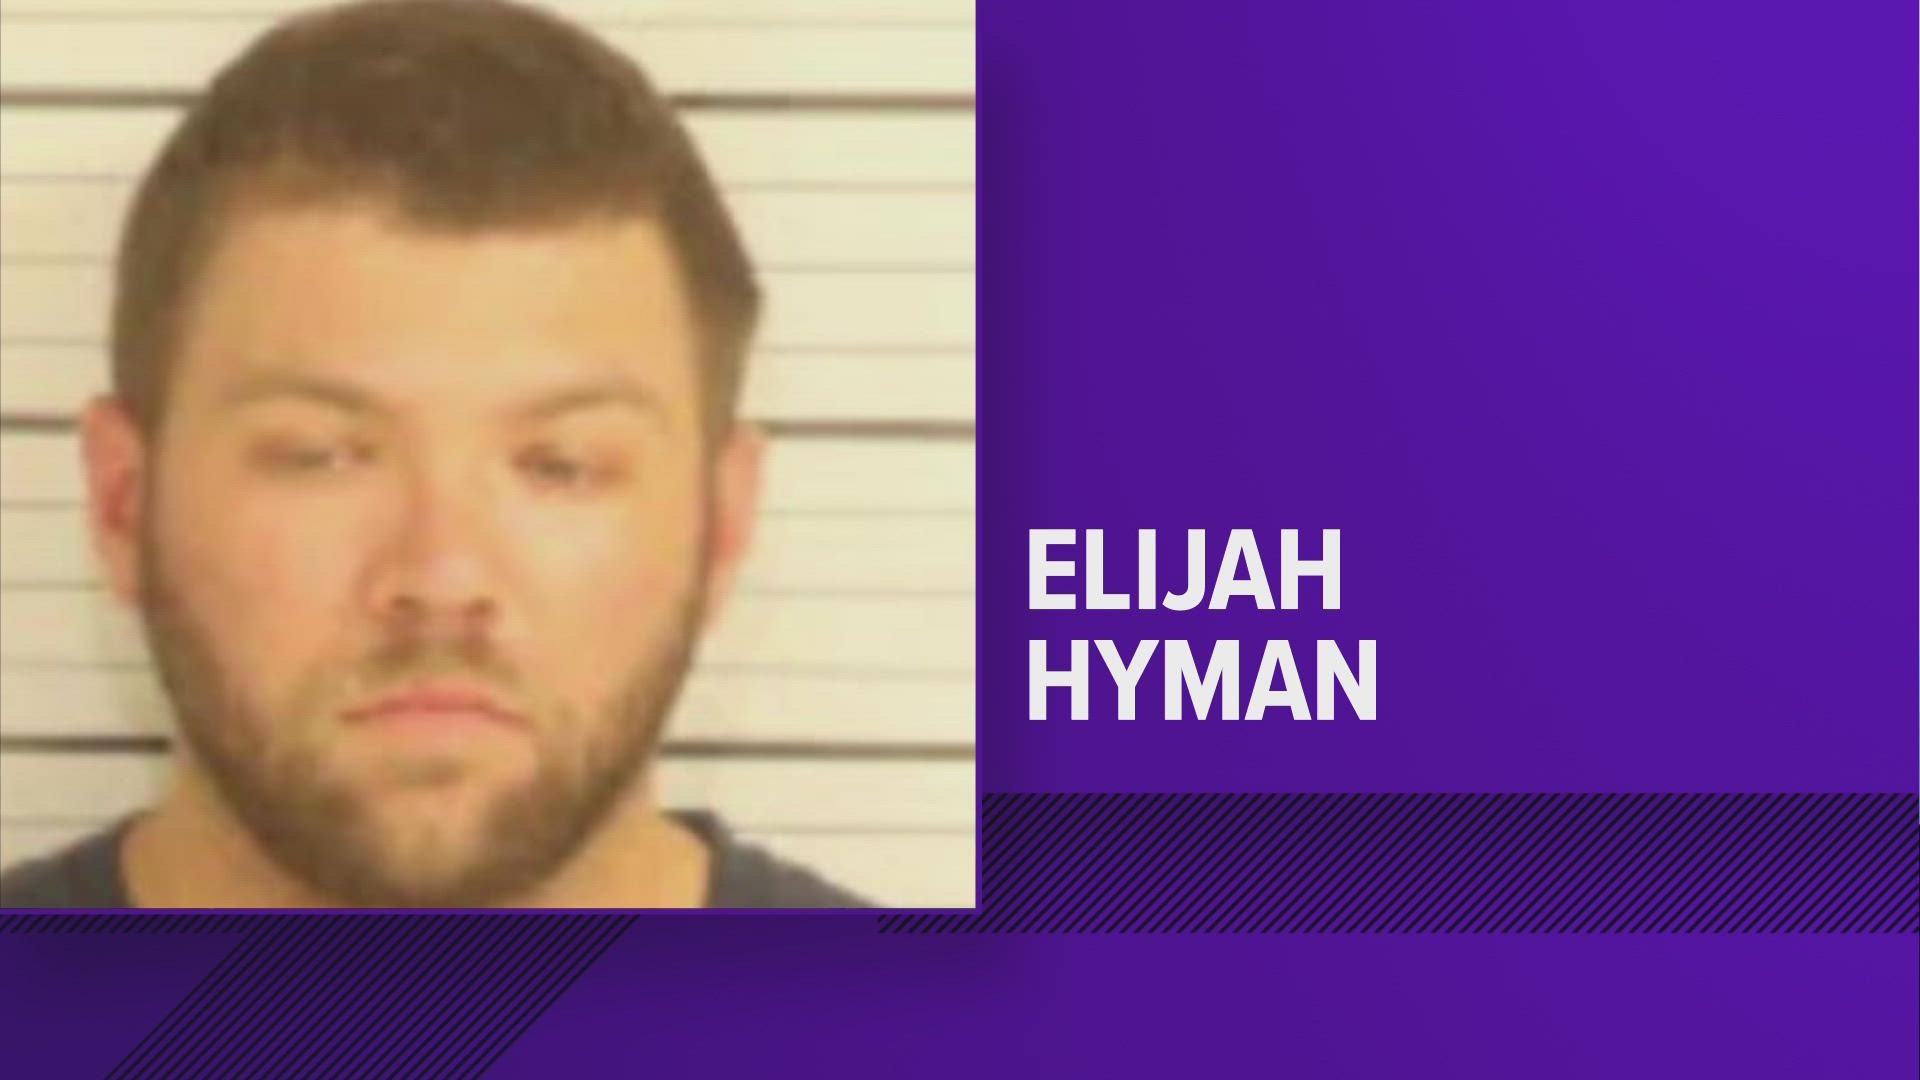 Police responded to an armed mental consumer call near 3 a.m. in the 200 block of South Main Street Saturday. Hyman's bond was set at $50,000.